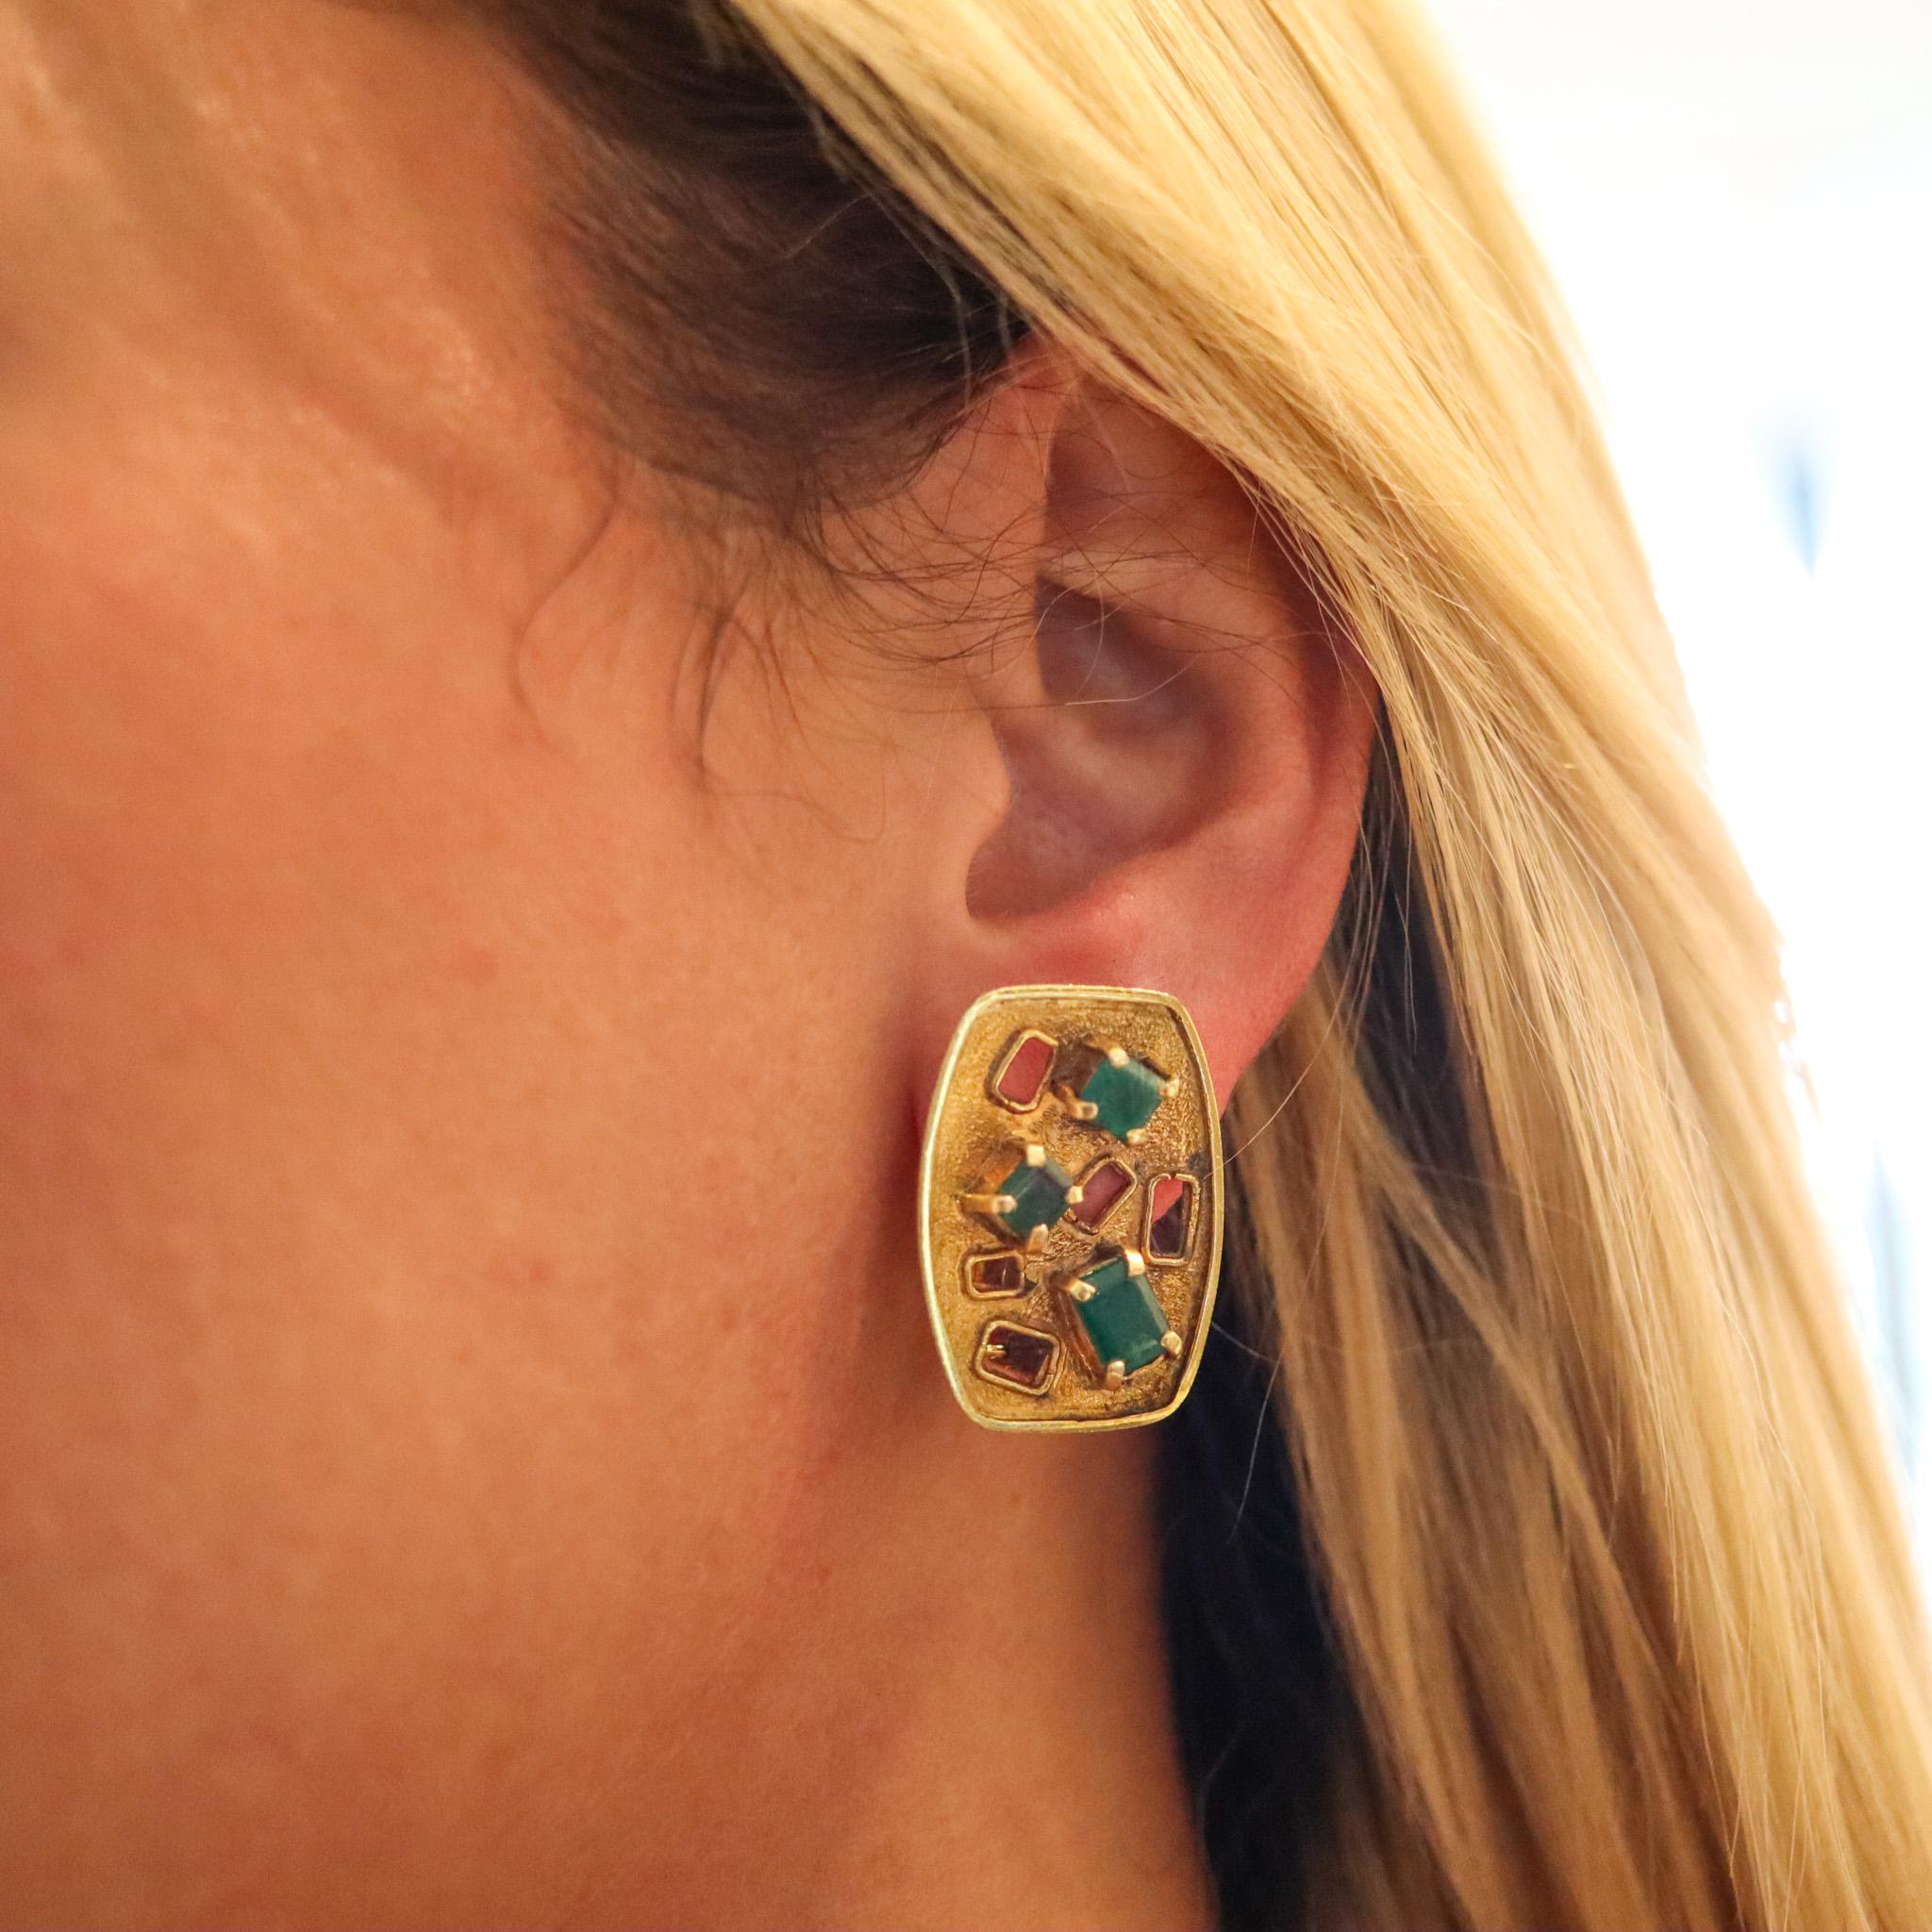 Bruno Guidi 1970 Retro Modernist Earrings In 18Kt Gold With 4.45 Ctw In Emeralds In Excellent Condition For Sale In Miami, FL